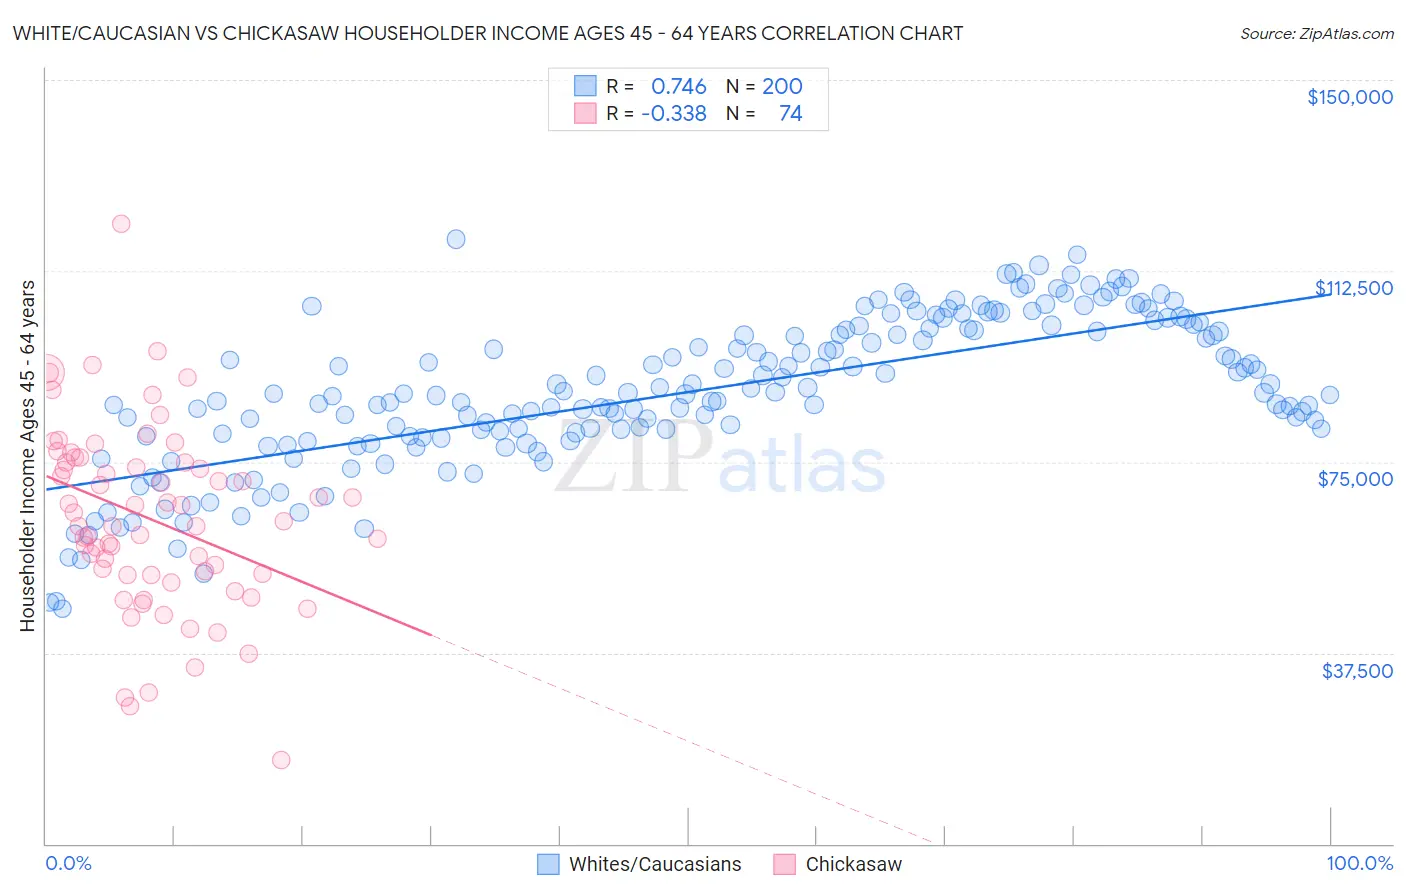 White/Caucasian vs Chickasaw Householder Income Ages 45 - 64 years